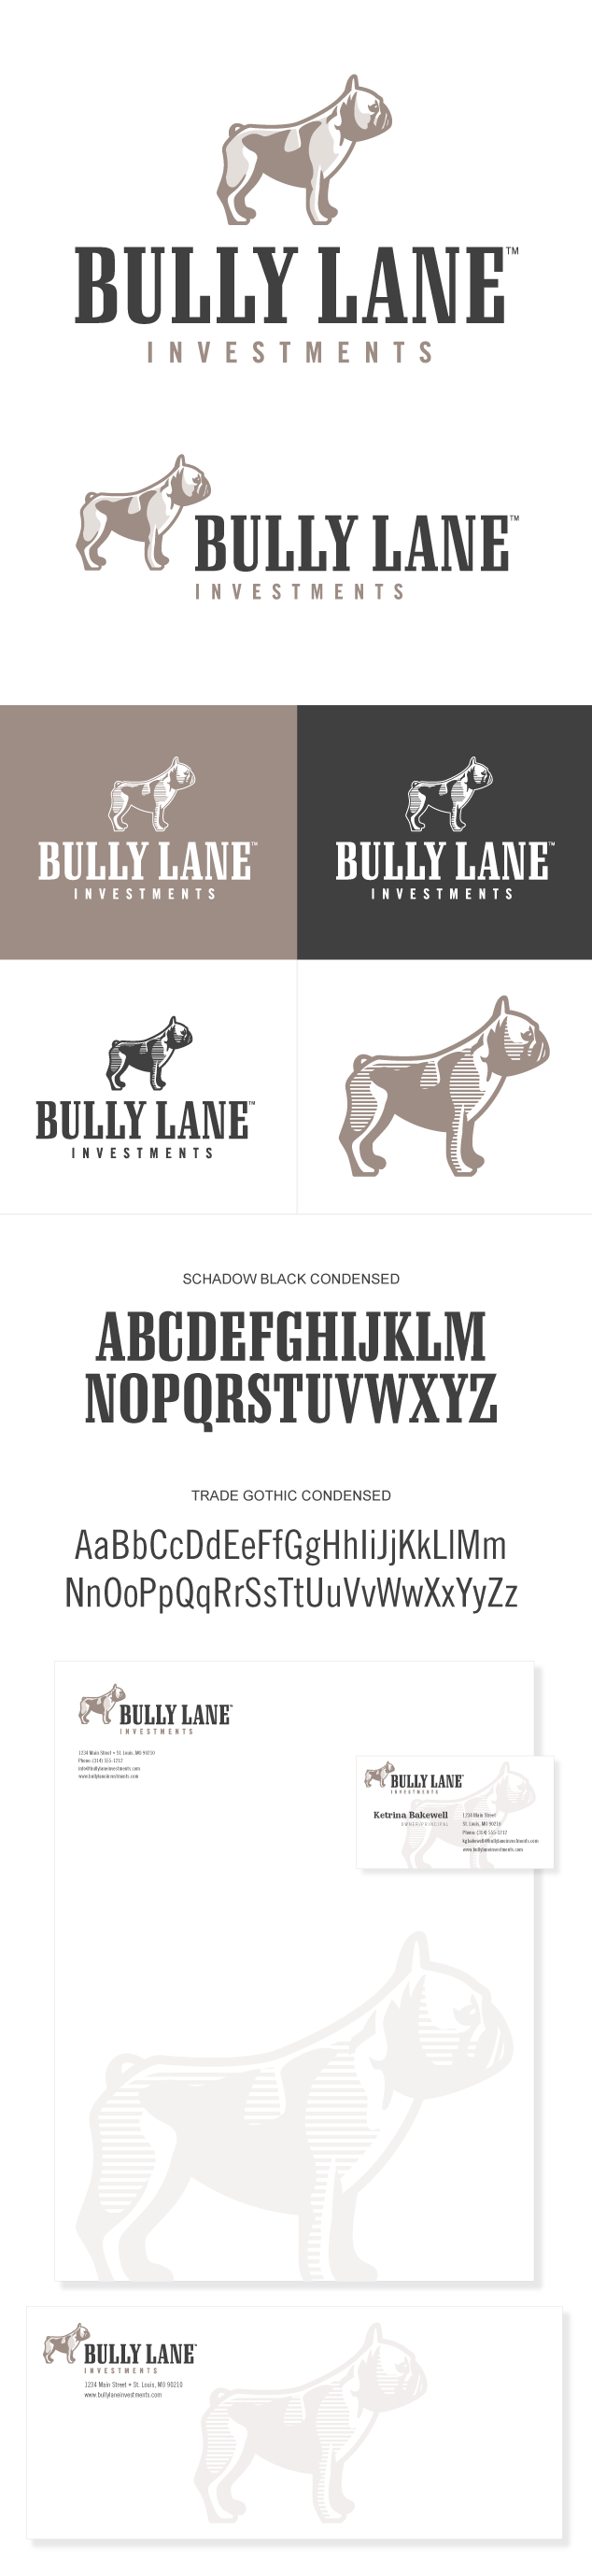 Bully Lane Investments branding and logo